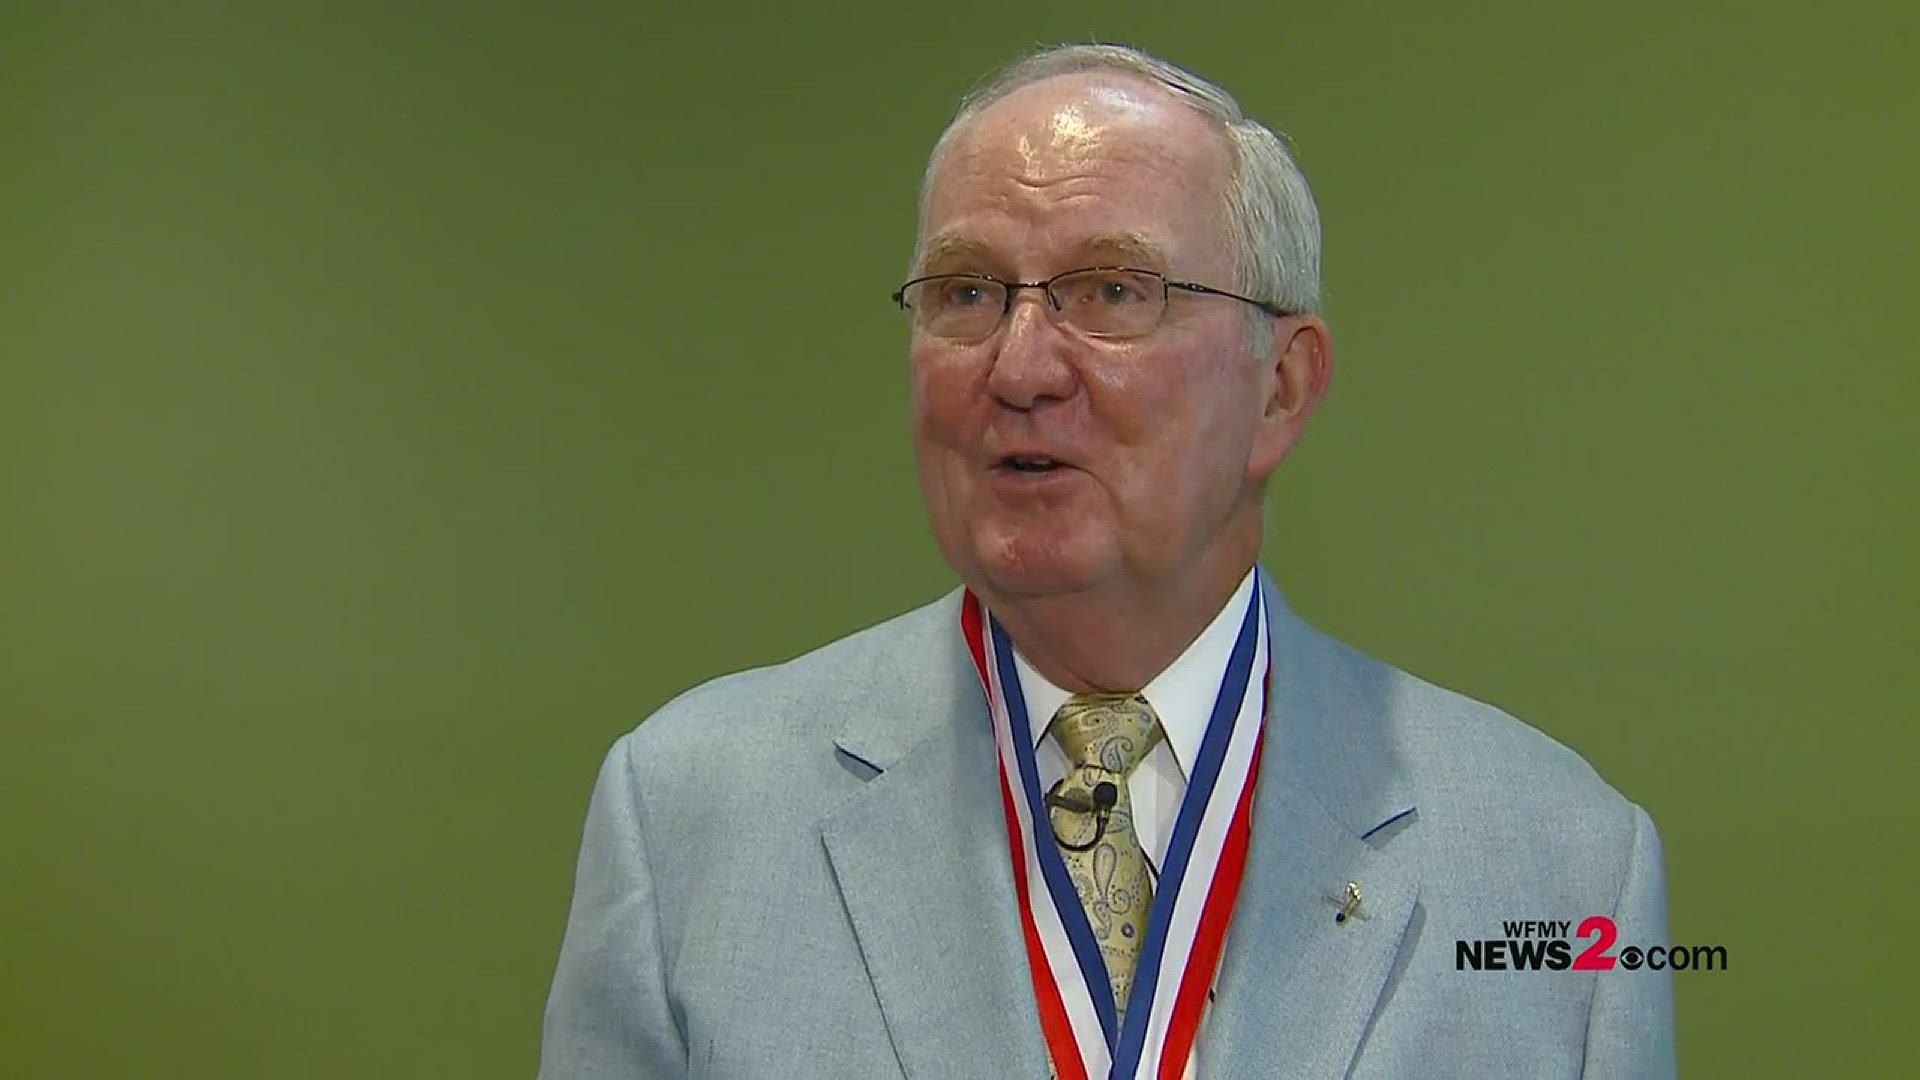 Woody Durham called more than 1,800 broadcasts on the Tar Heels Sports Network, winning the North Carolina Sportscaster of the Year award 13 times. He worked at WFMY News 2 for 14 years.